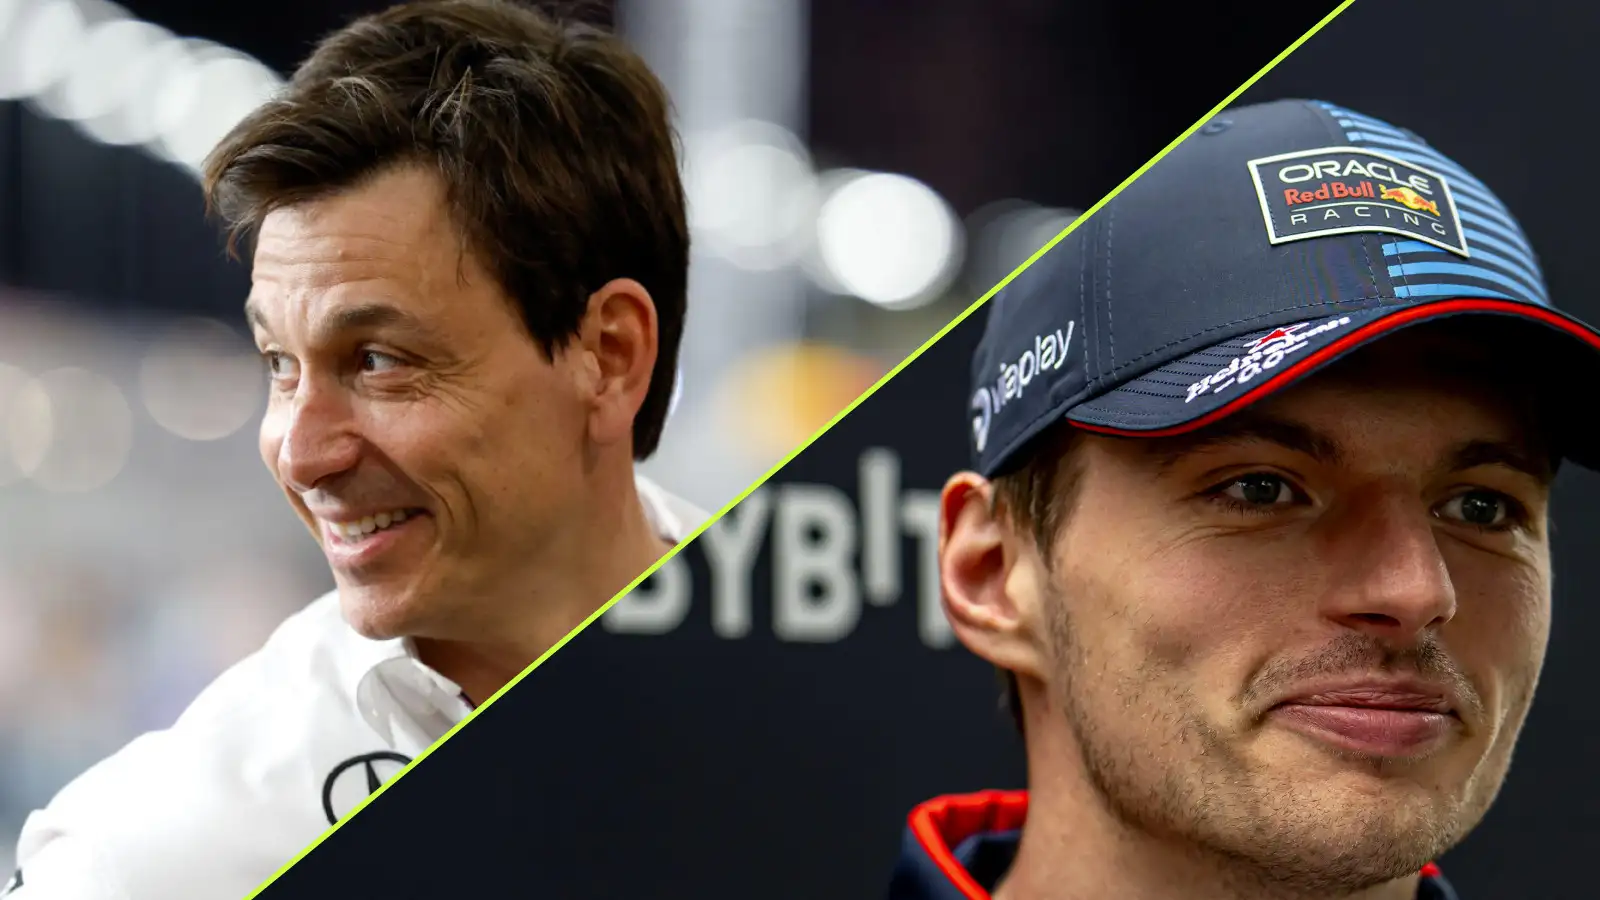 ‘If I were Max’ – Toto Wolff advises Max Verstappen on 2025 decision in Mercedes move ‘strategy’